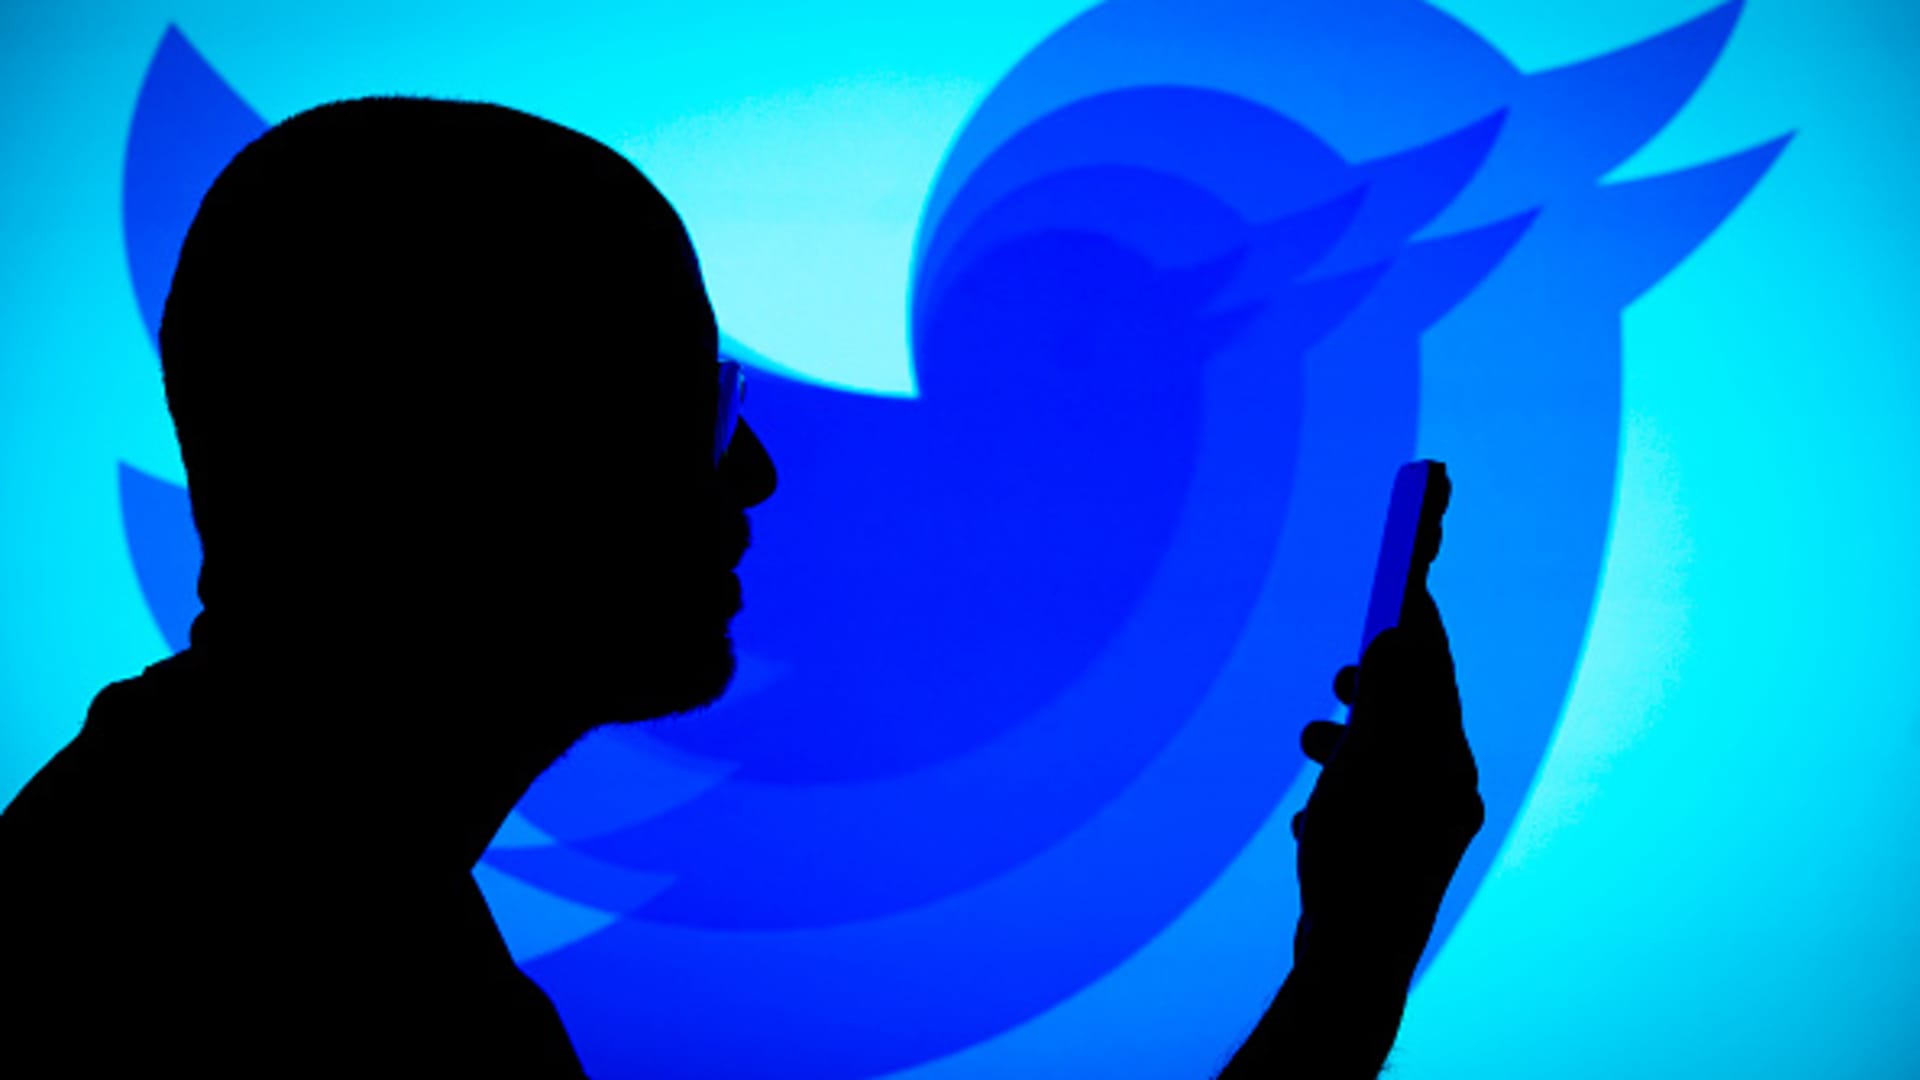 Thousands of users report problems accessing Twitter